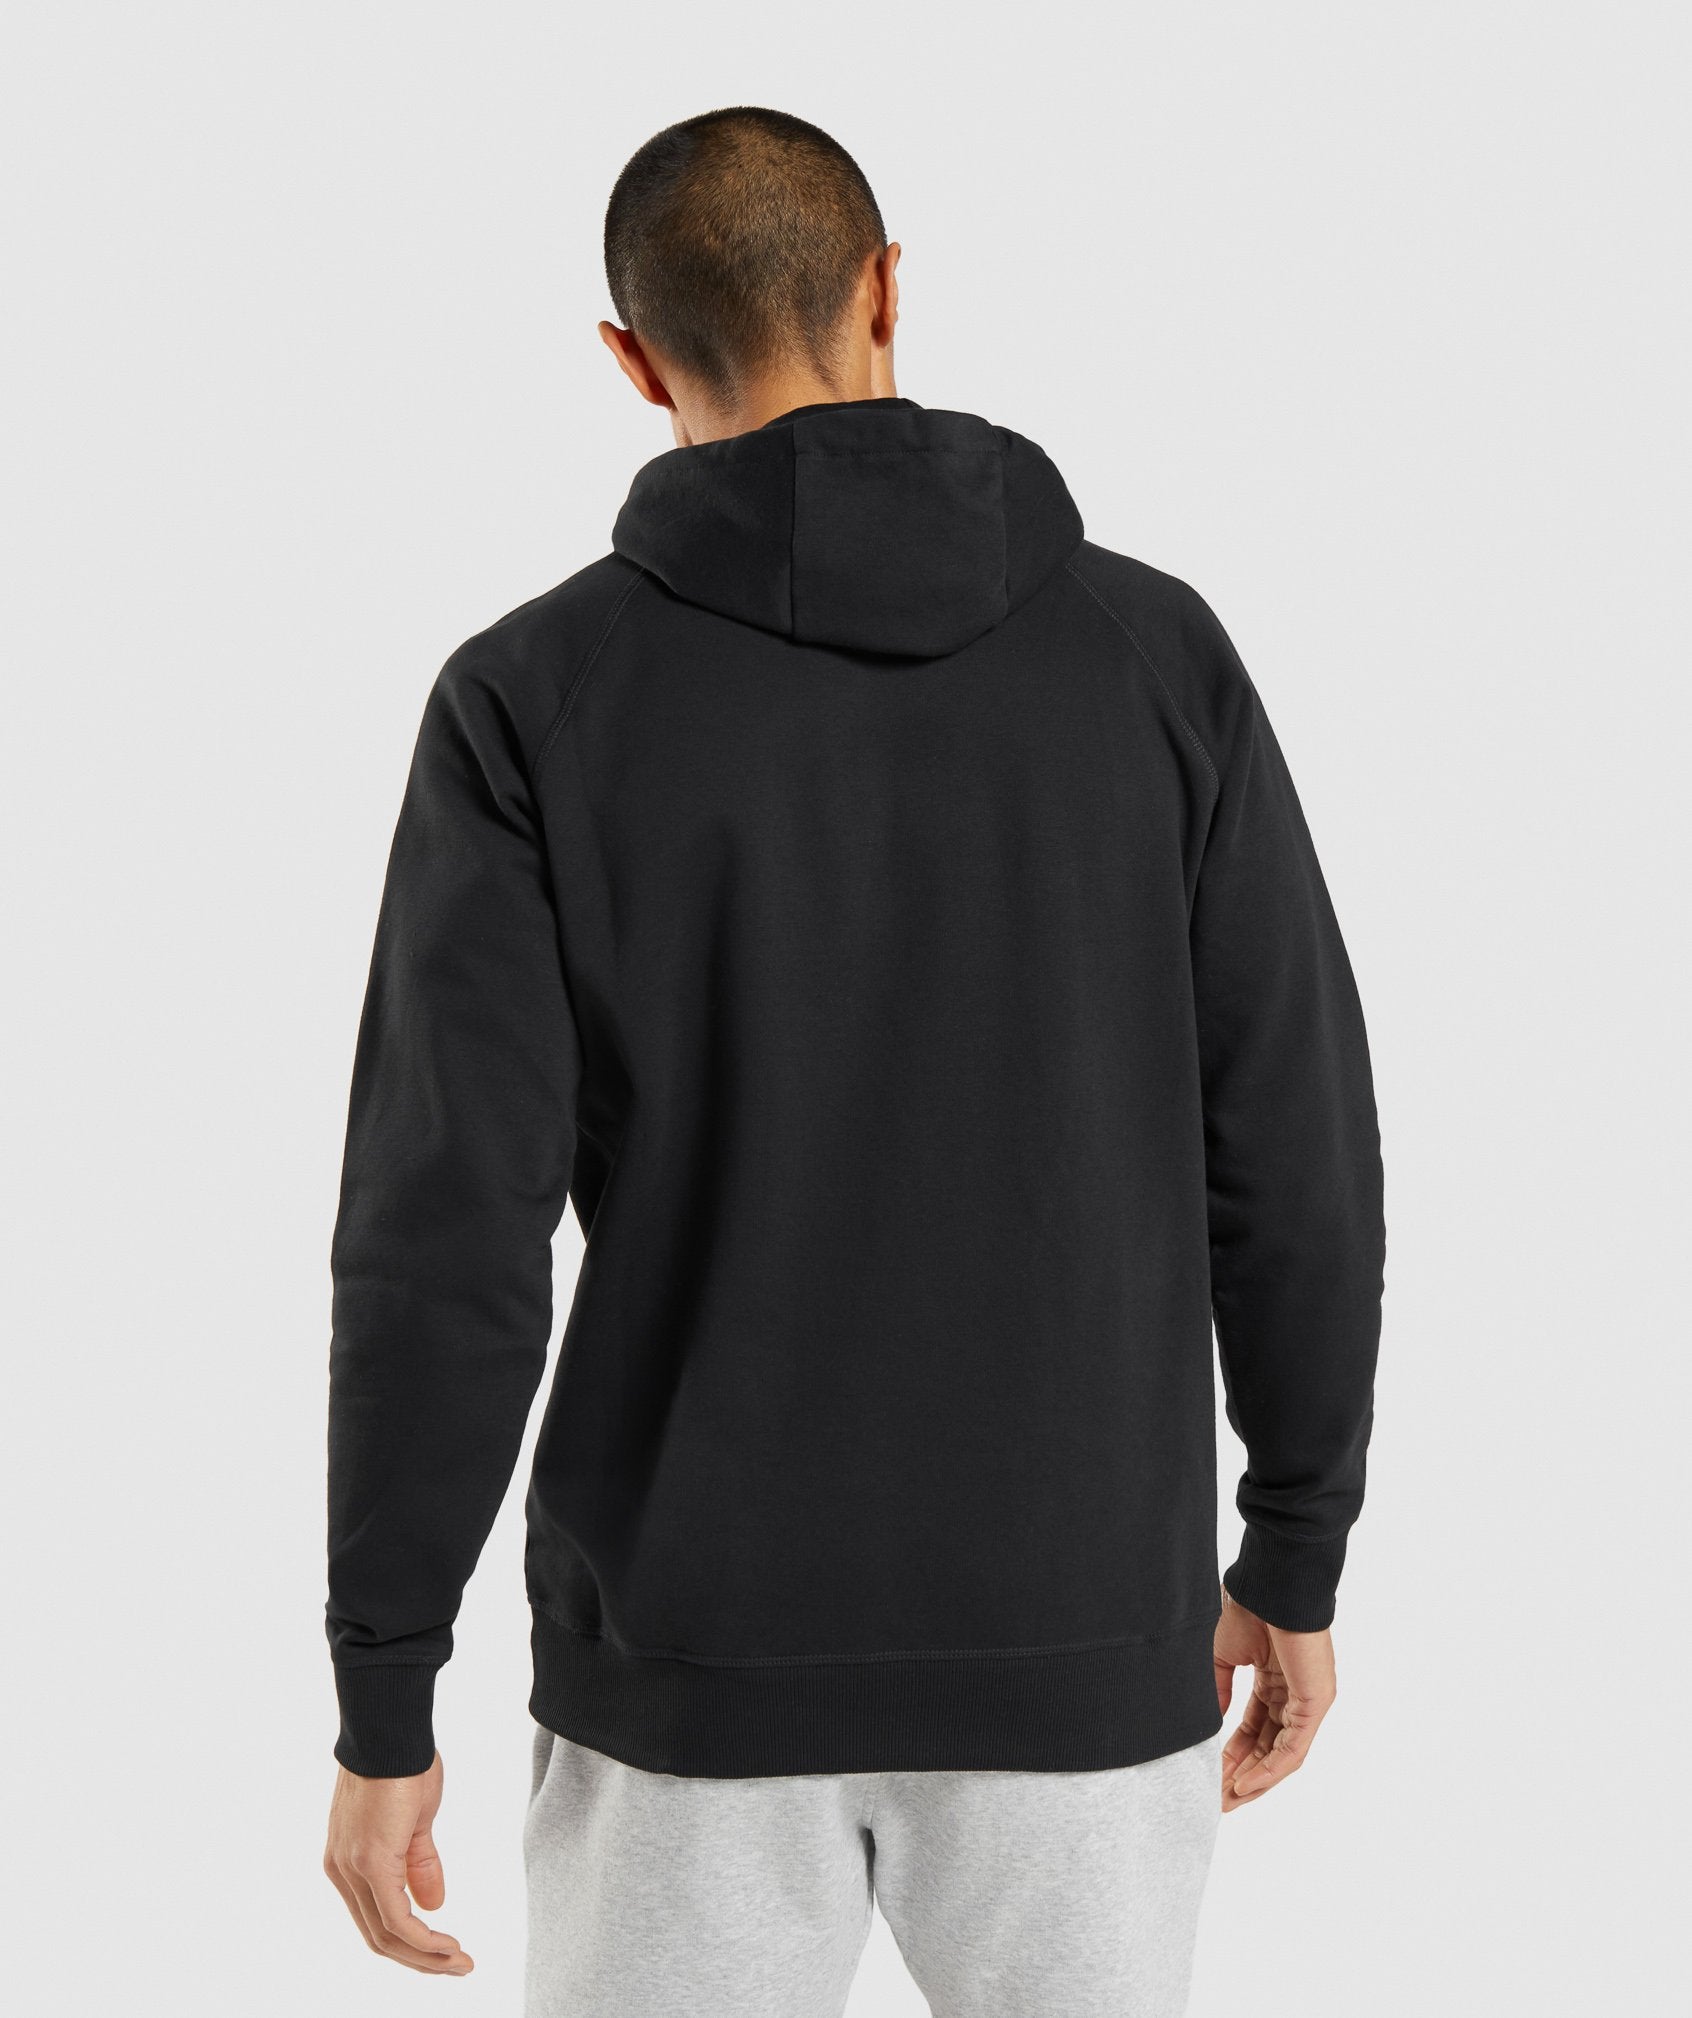 Central Hoodie in Black - view 2